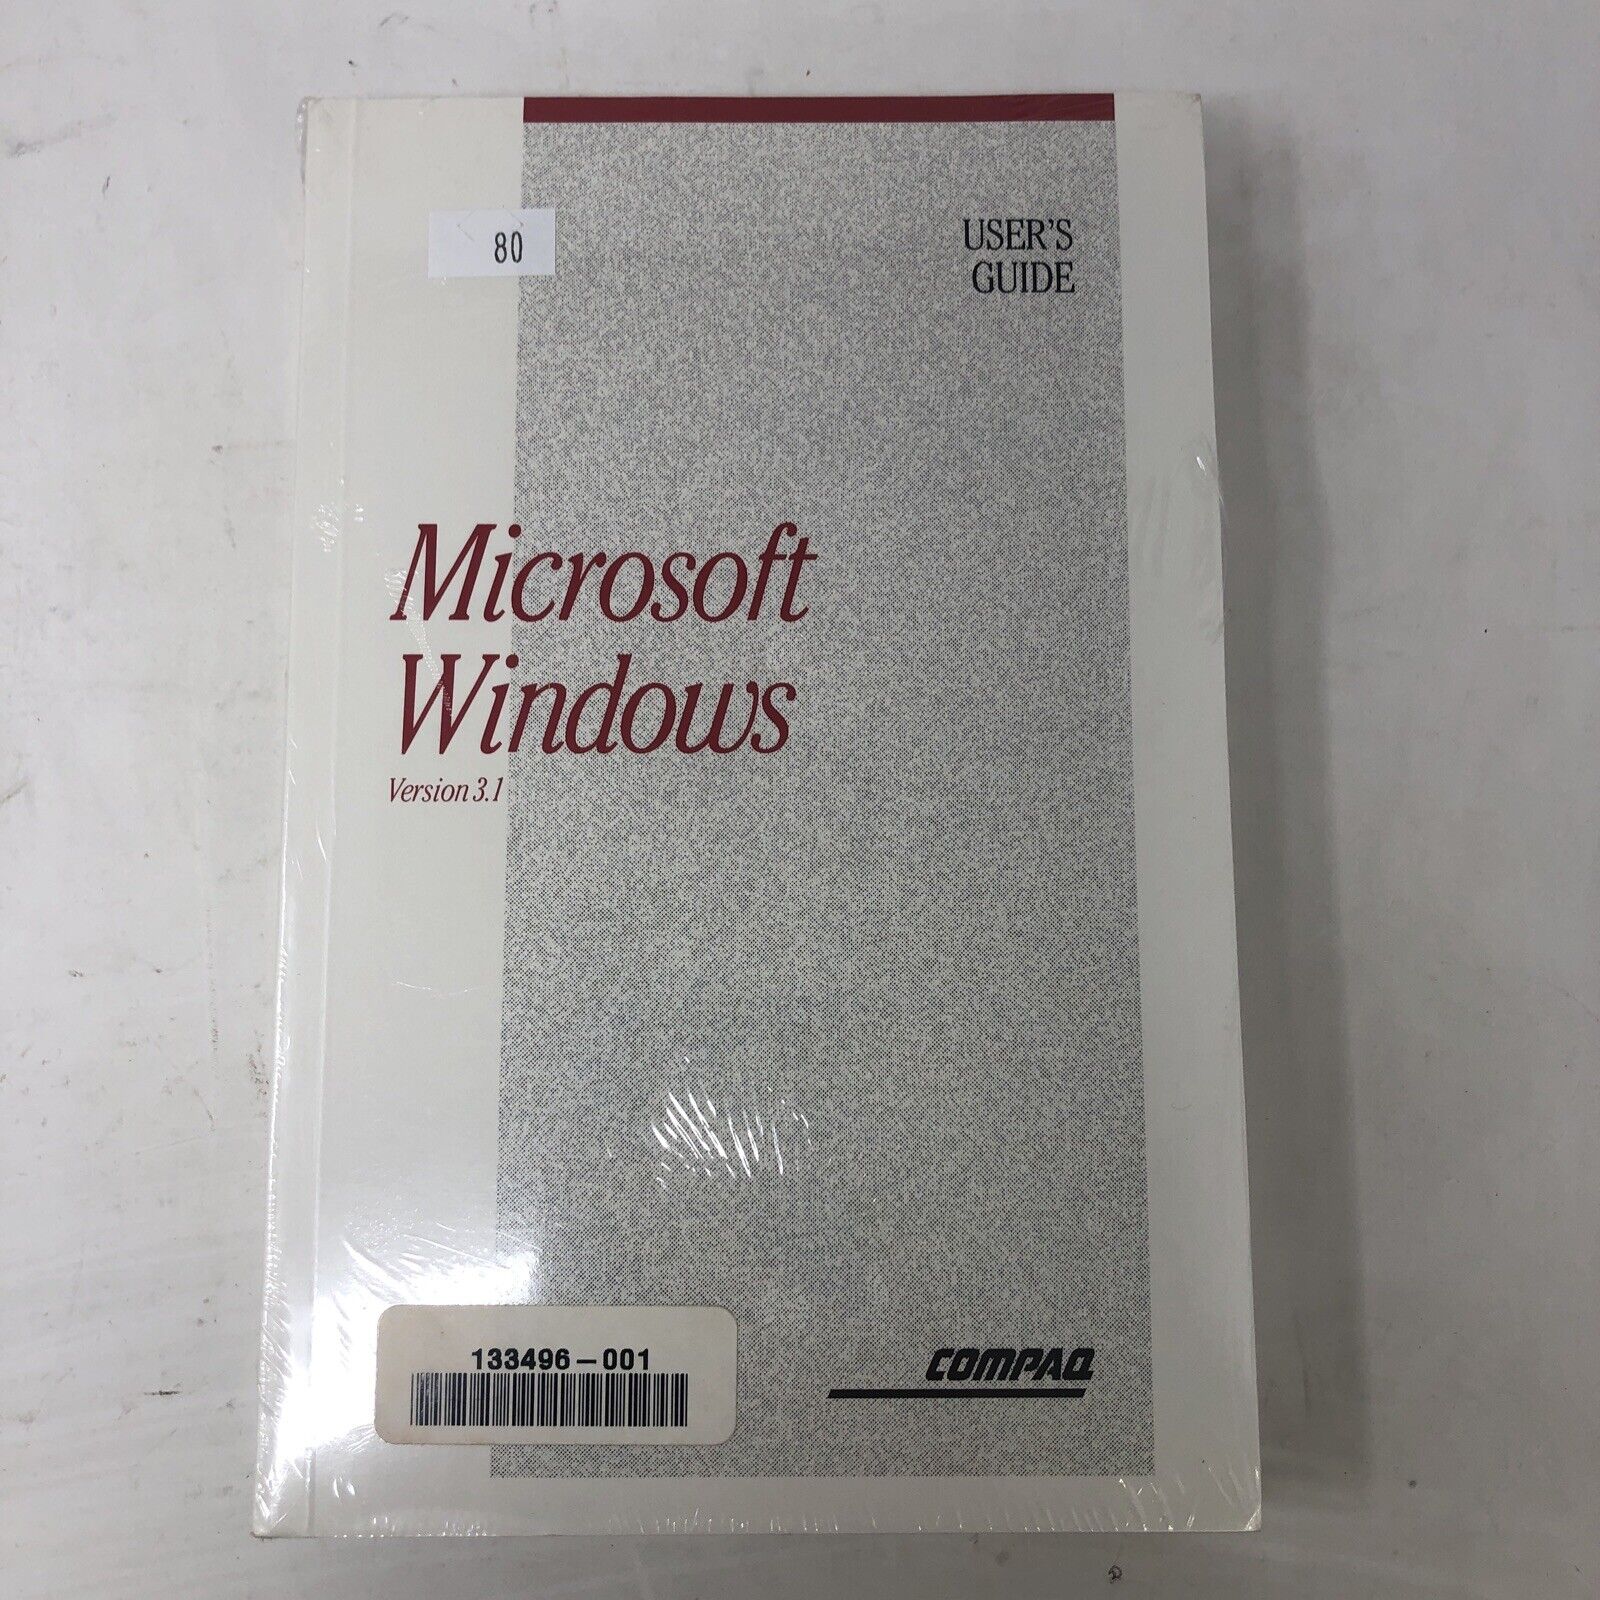 COMPAQ MICROSOFT WINDOWS USER\'S GUIDE 3.1 OPERATING SYSTEM SEALED - NOS